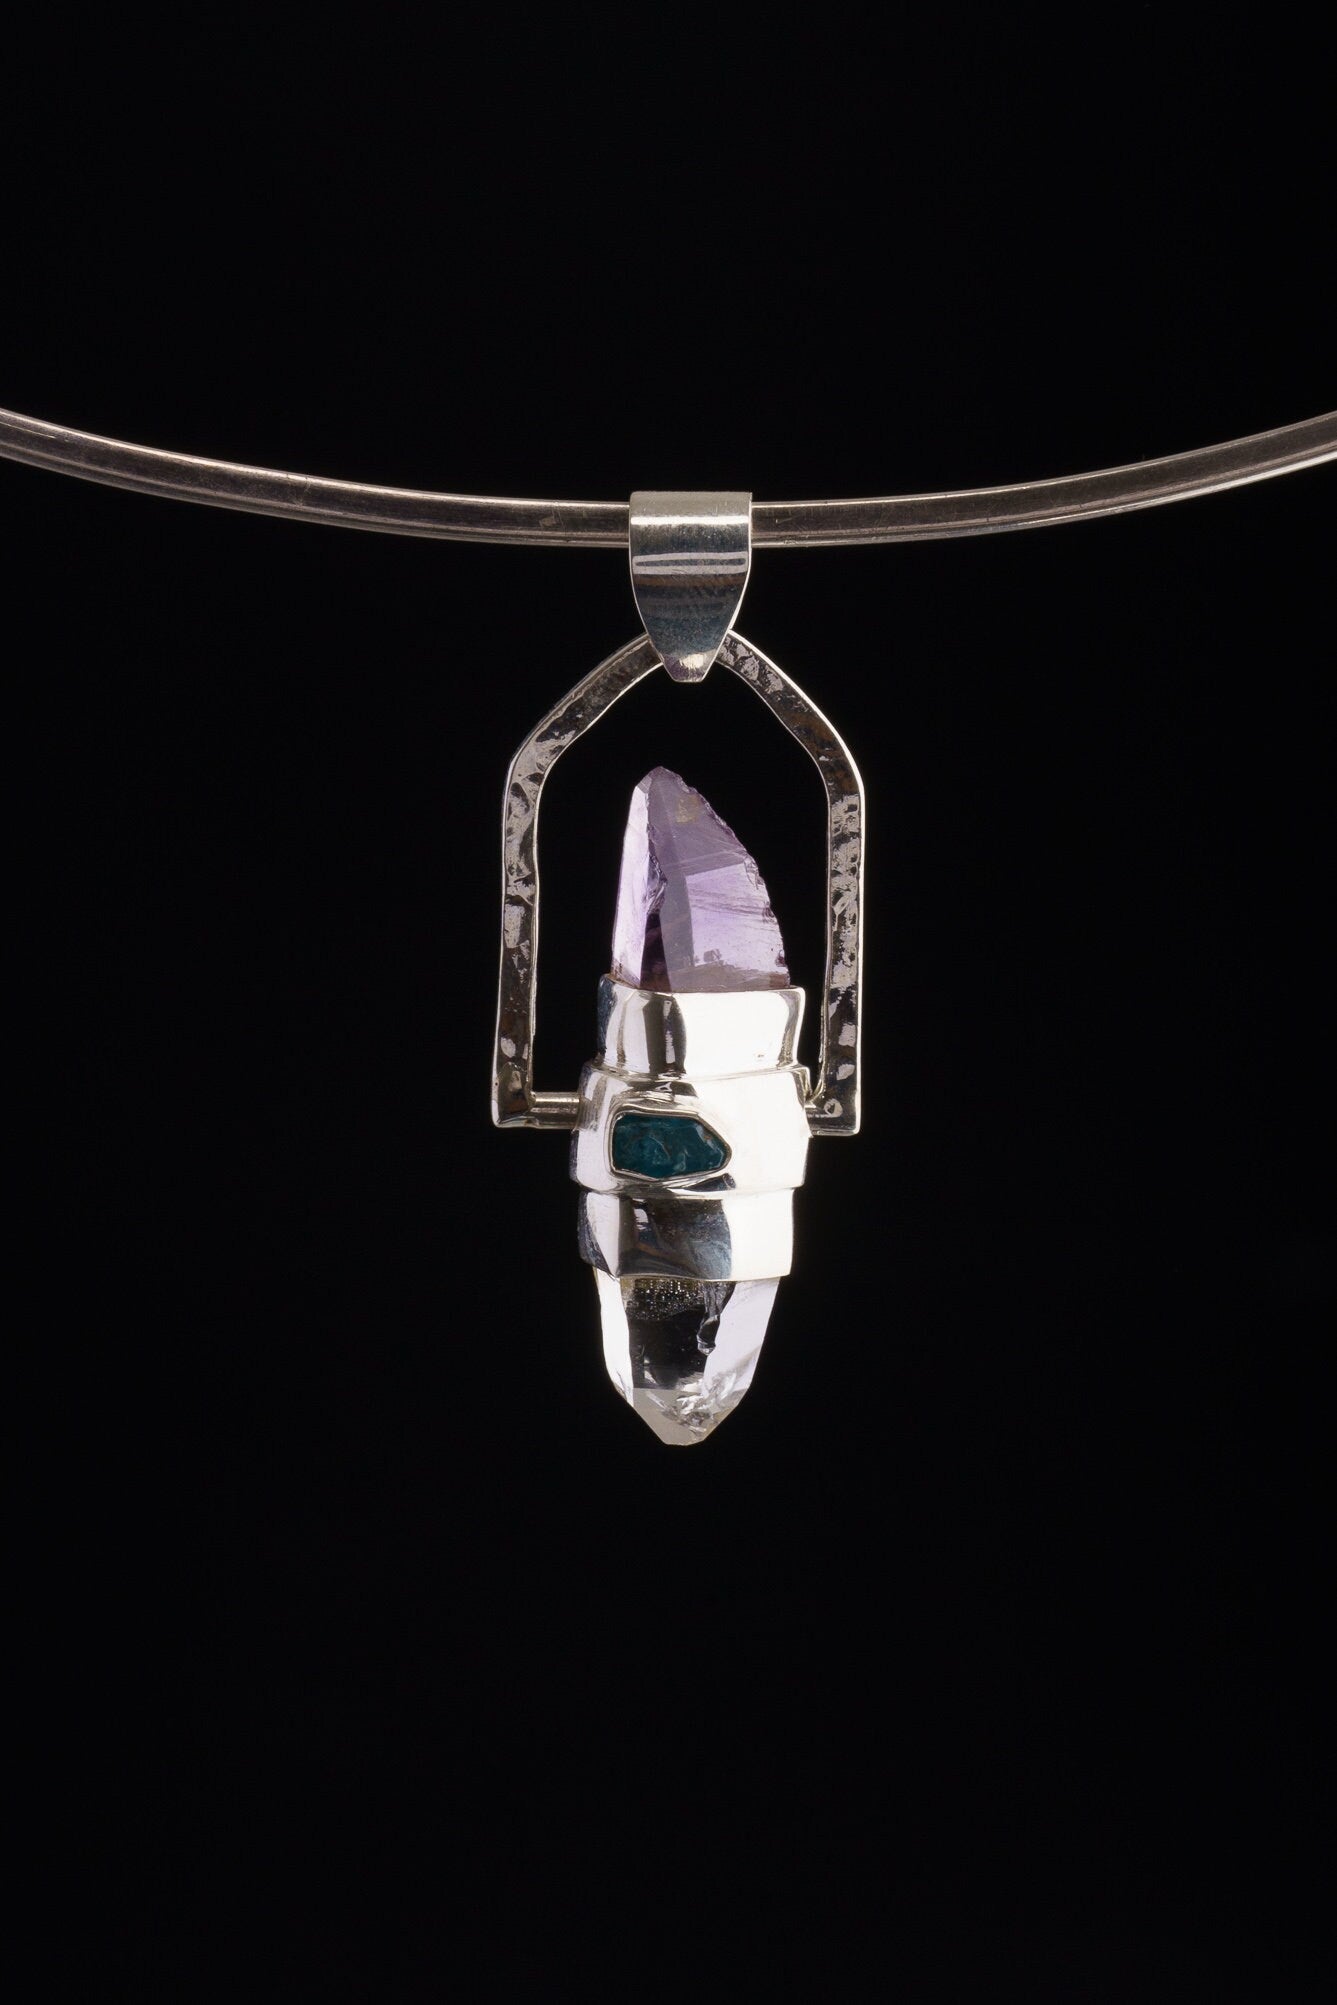 Himalayan Lazer & Vera cruz Lemurian Point with a Rubellite, Labradorite and Apatite - Sterling Silver Set - Spinning Crystal Pendant